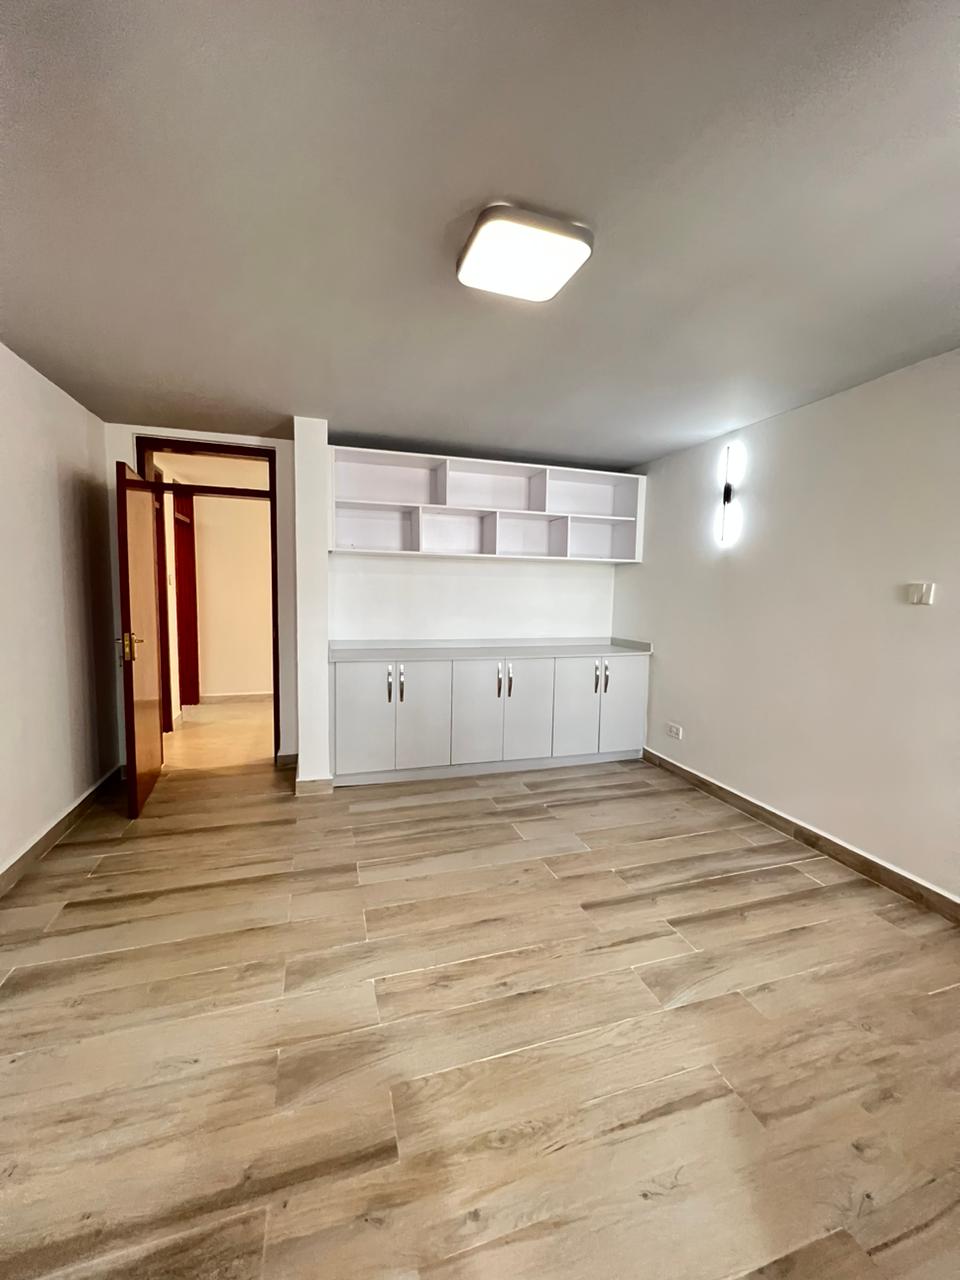 Spacious newly renovated 5 bedroom duplex apartment to let in Kilimani. Has Few units in the compound. All en-suite, swimming pool. 180,000 Musilli Homes